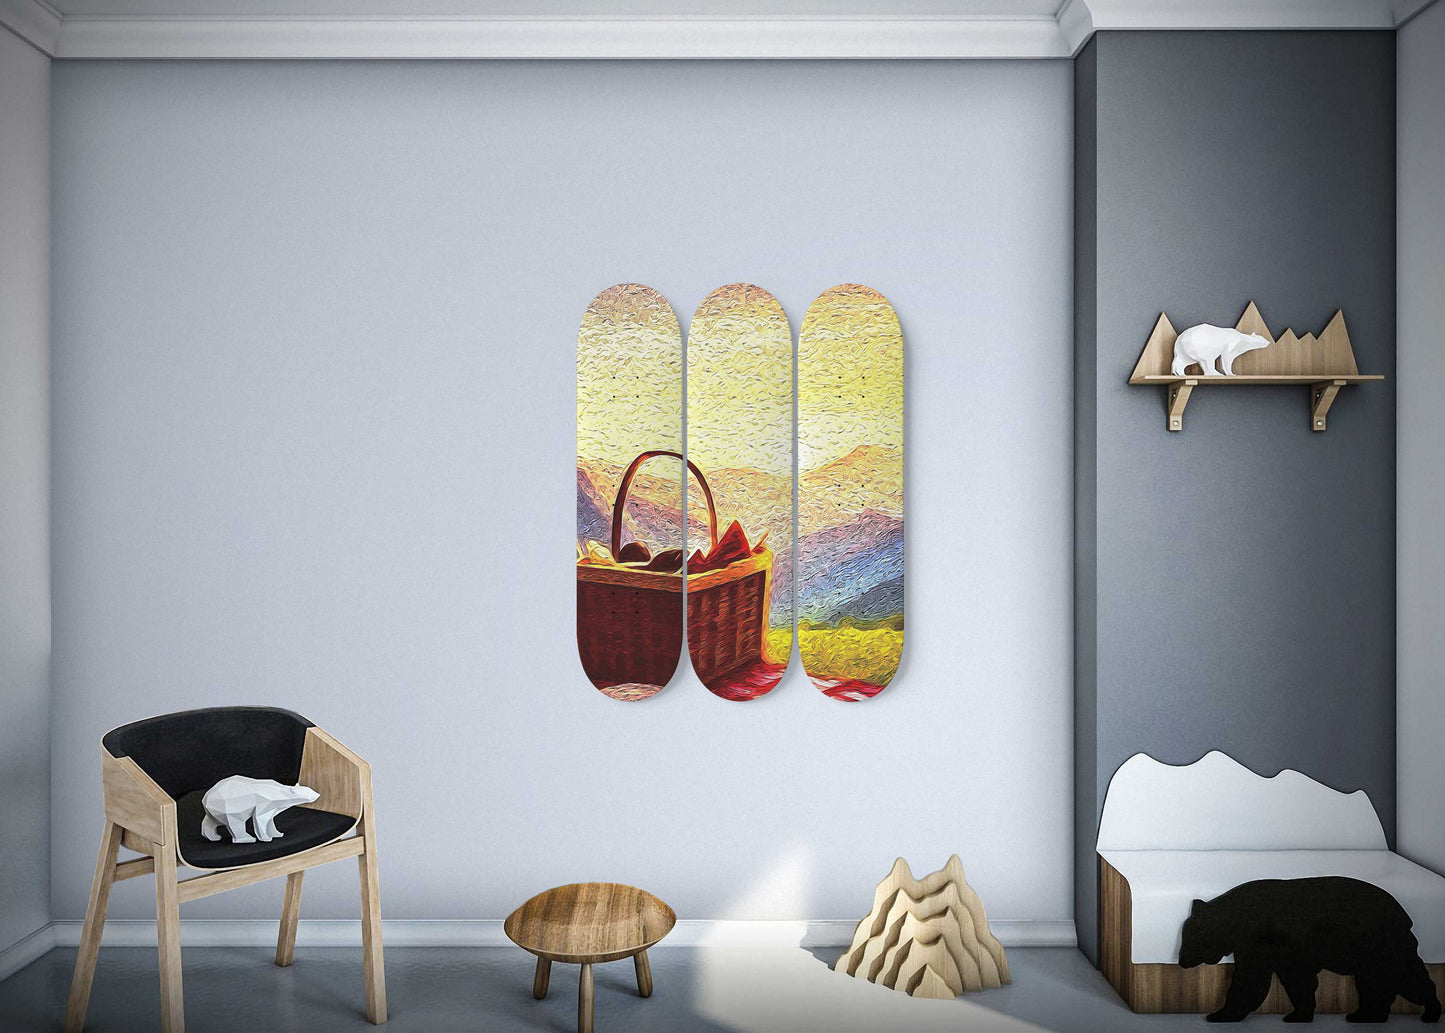 Van Gogh Basket and Sunset 3-Deck Skateboard Wall Art: A Brush with Nature